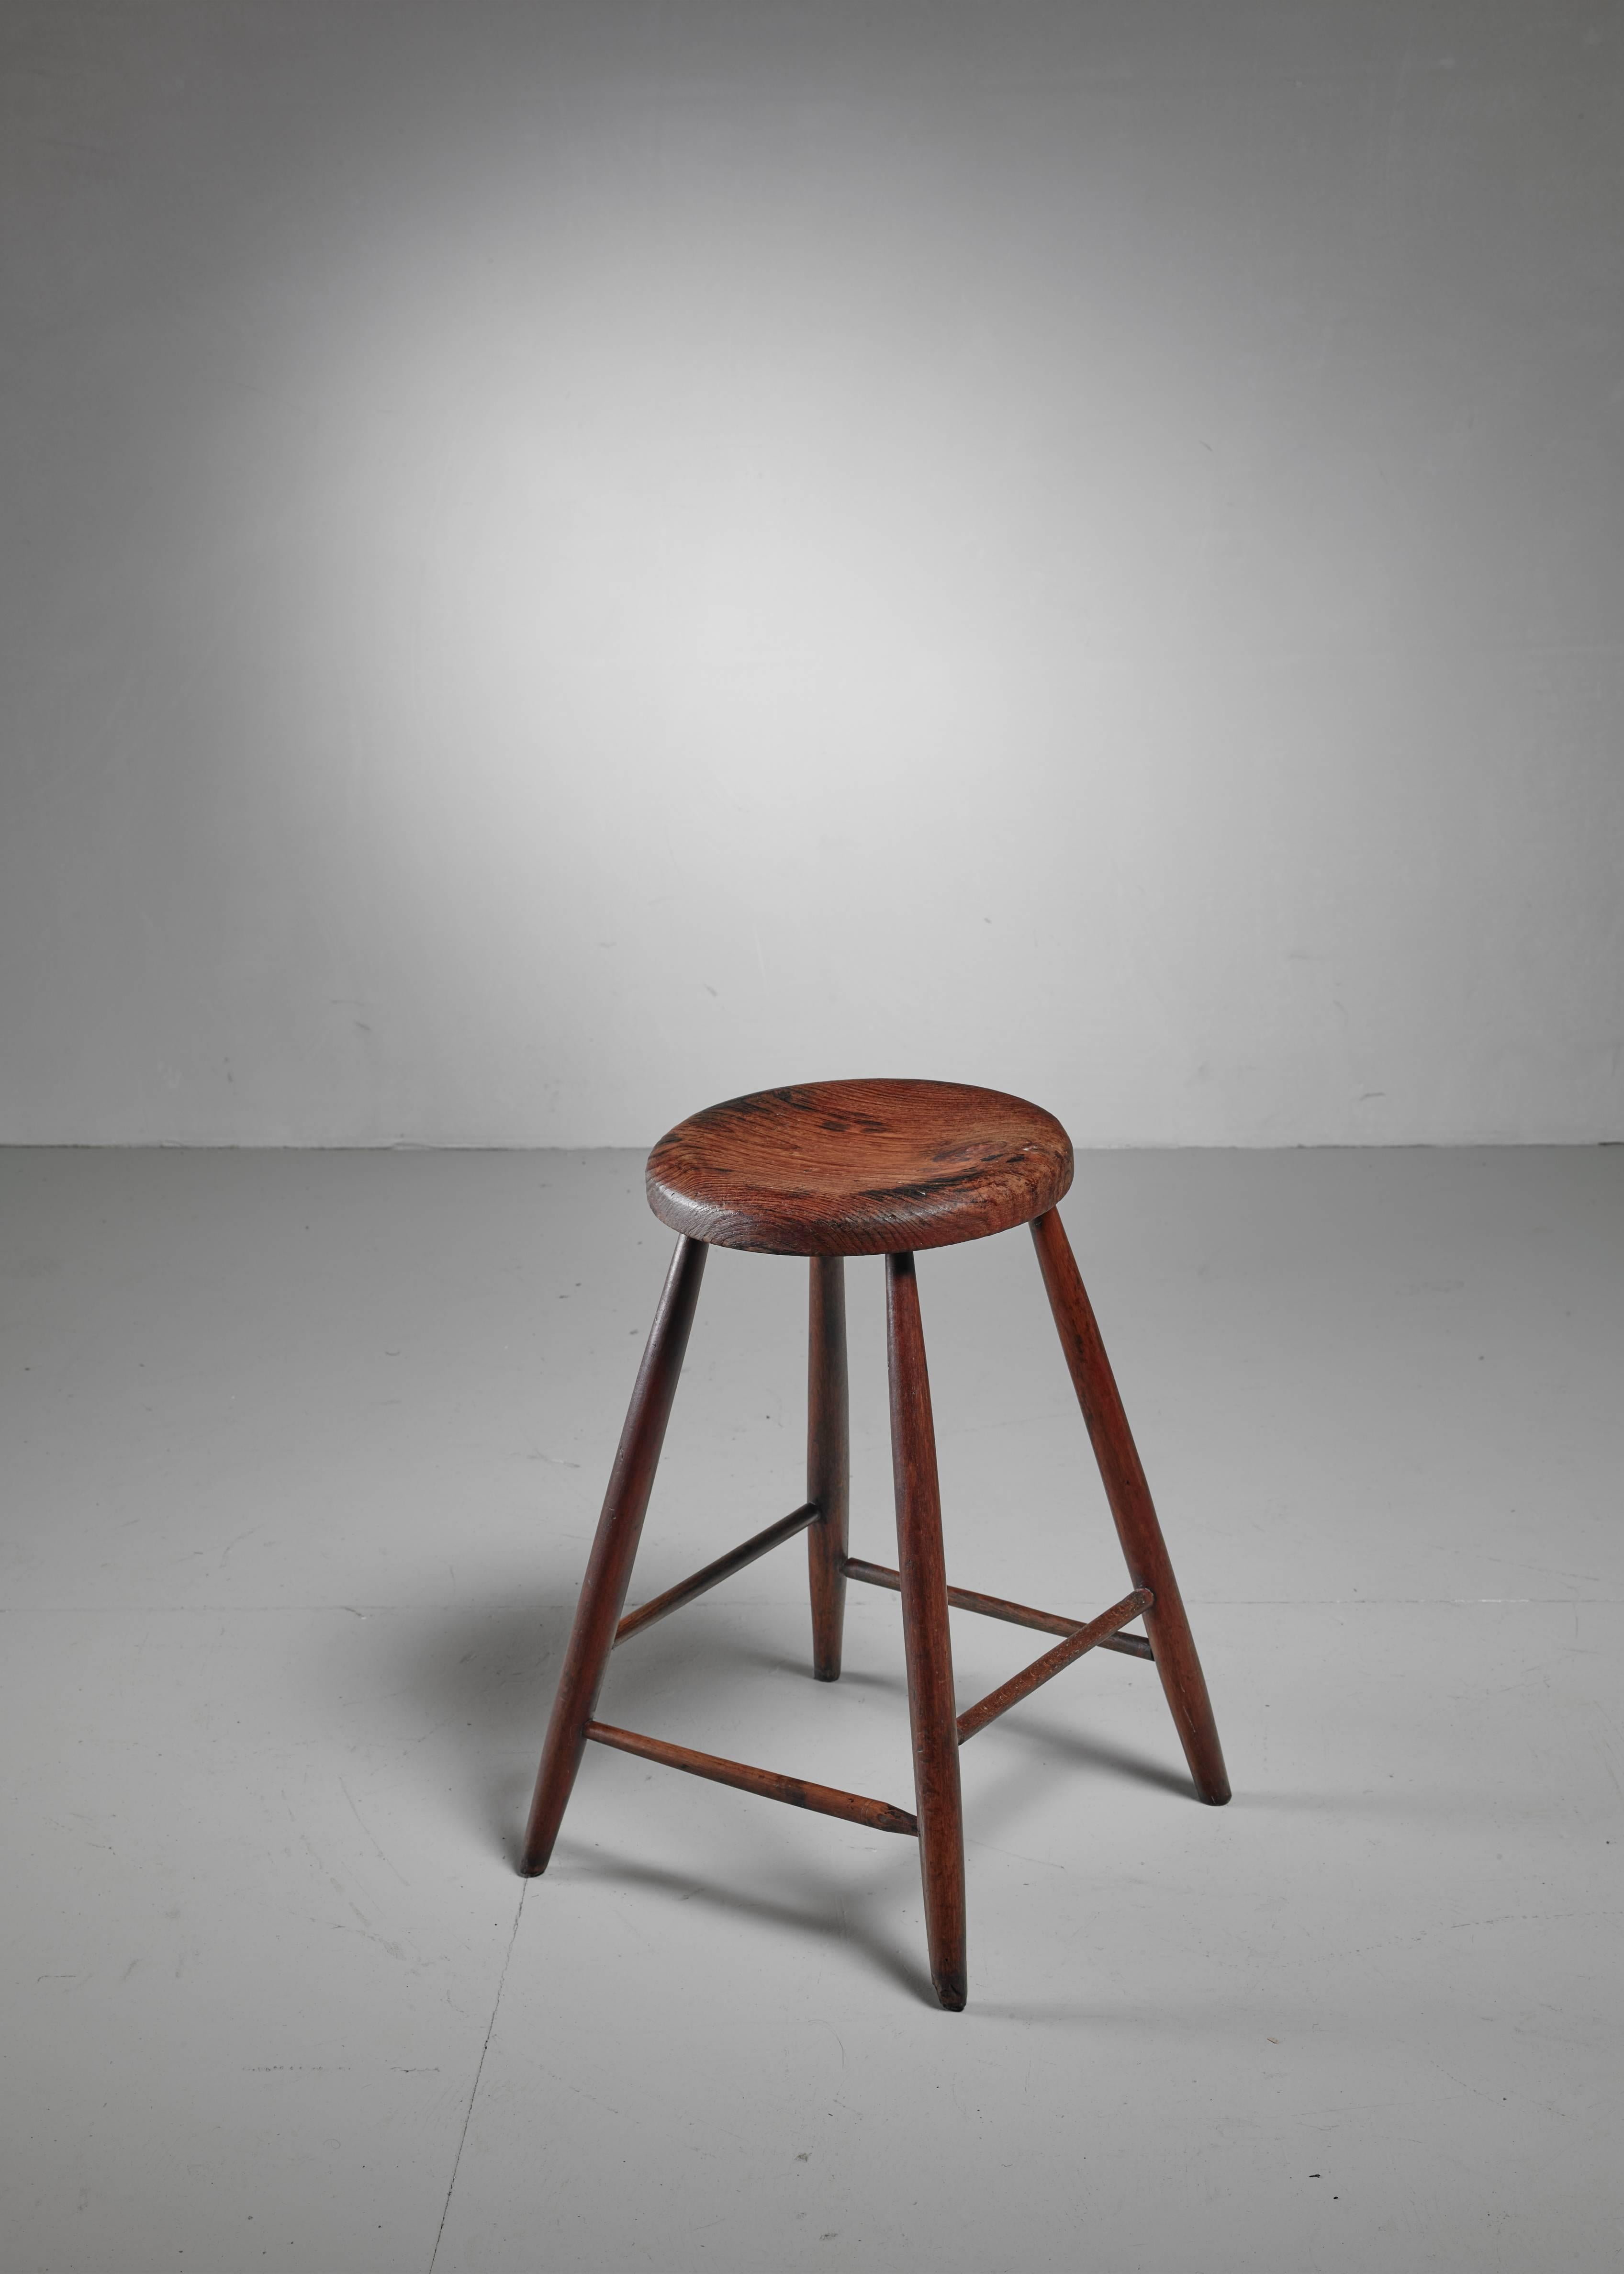 A unique, American wooden studio crafted bar stool from the turn of the century. An interesting detail is that one of the spindles has been clearly recut, which makes it possible that the maker used recycled parts for this stool.